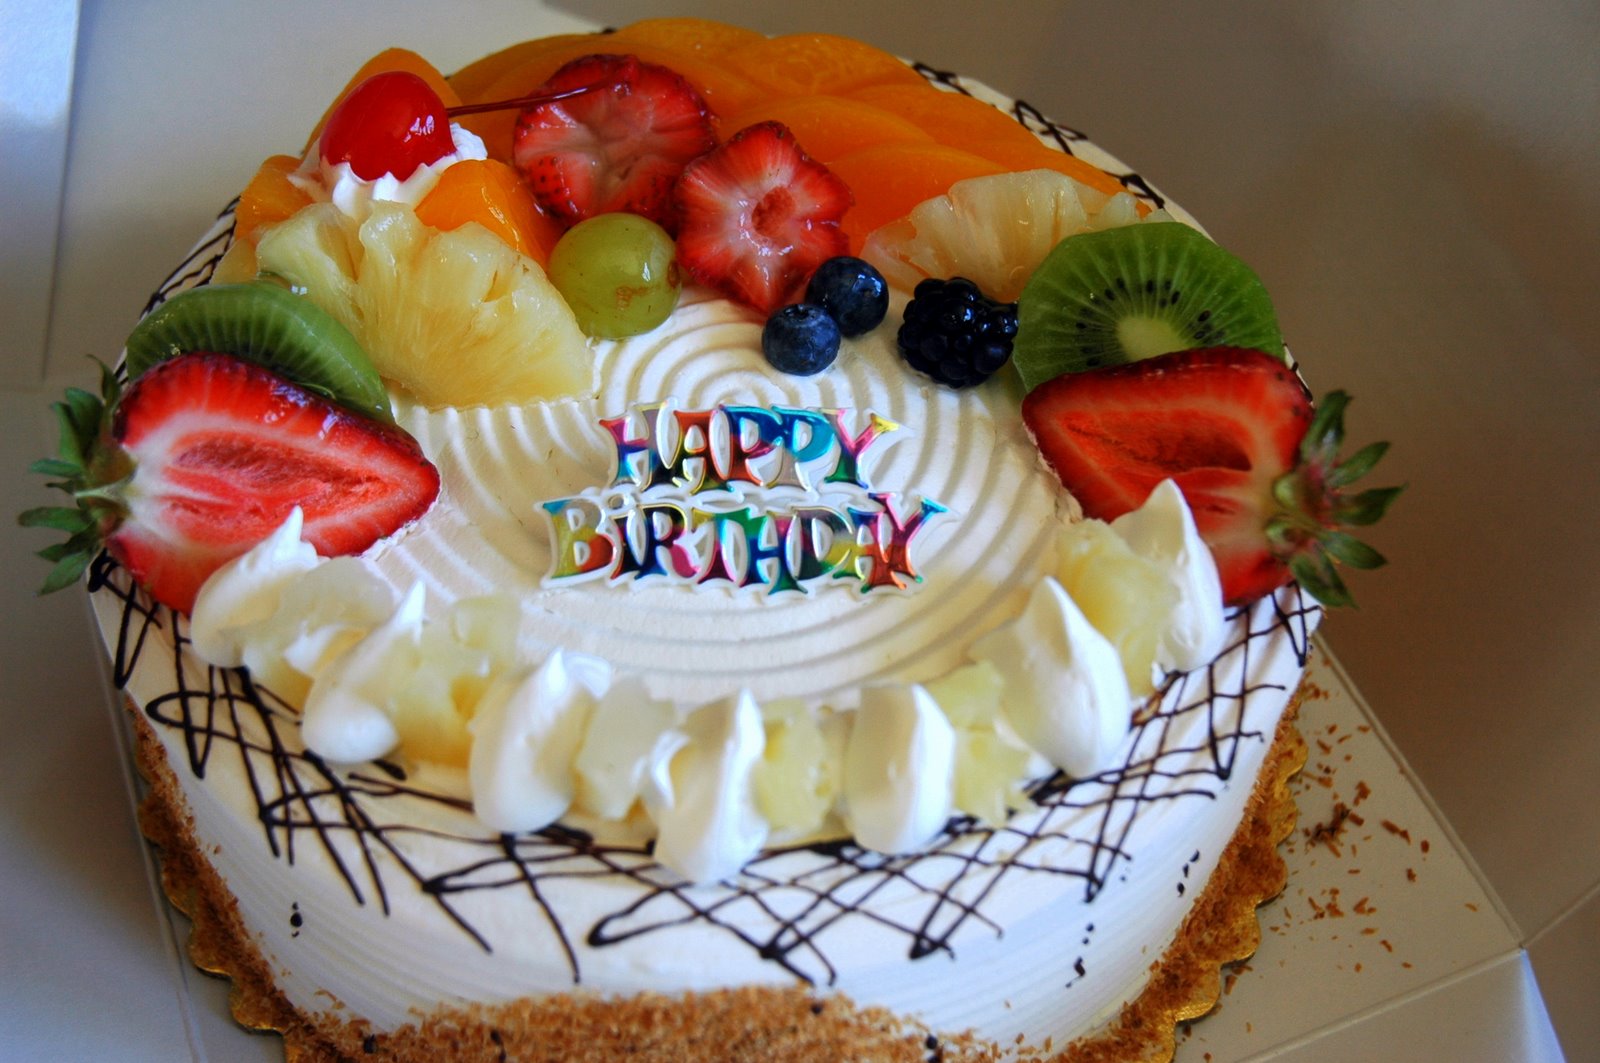 Online Wallpapers Shop: Happy Birthday Cake Pictures ...